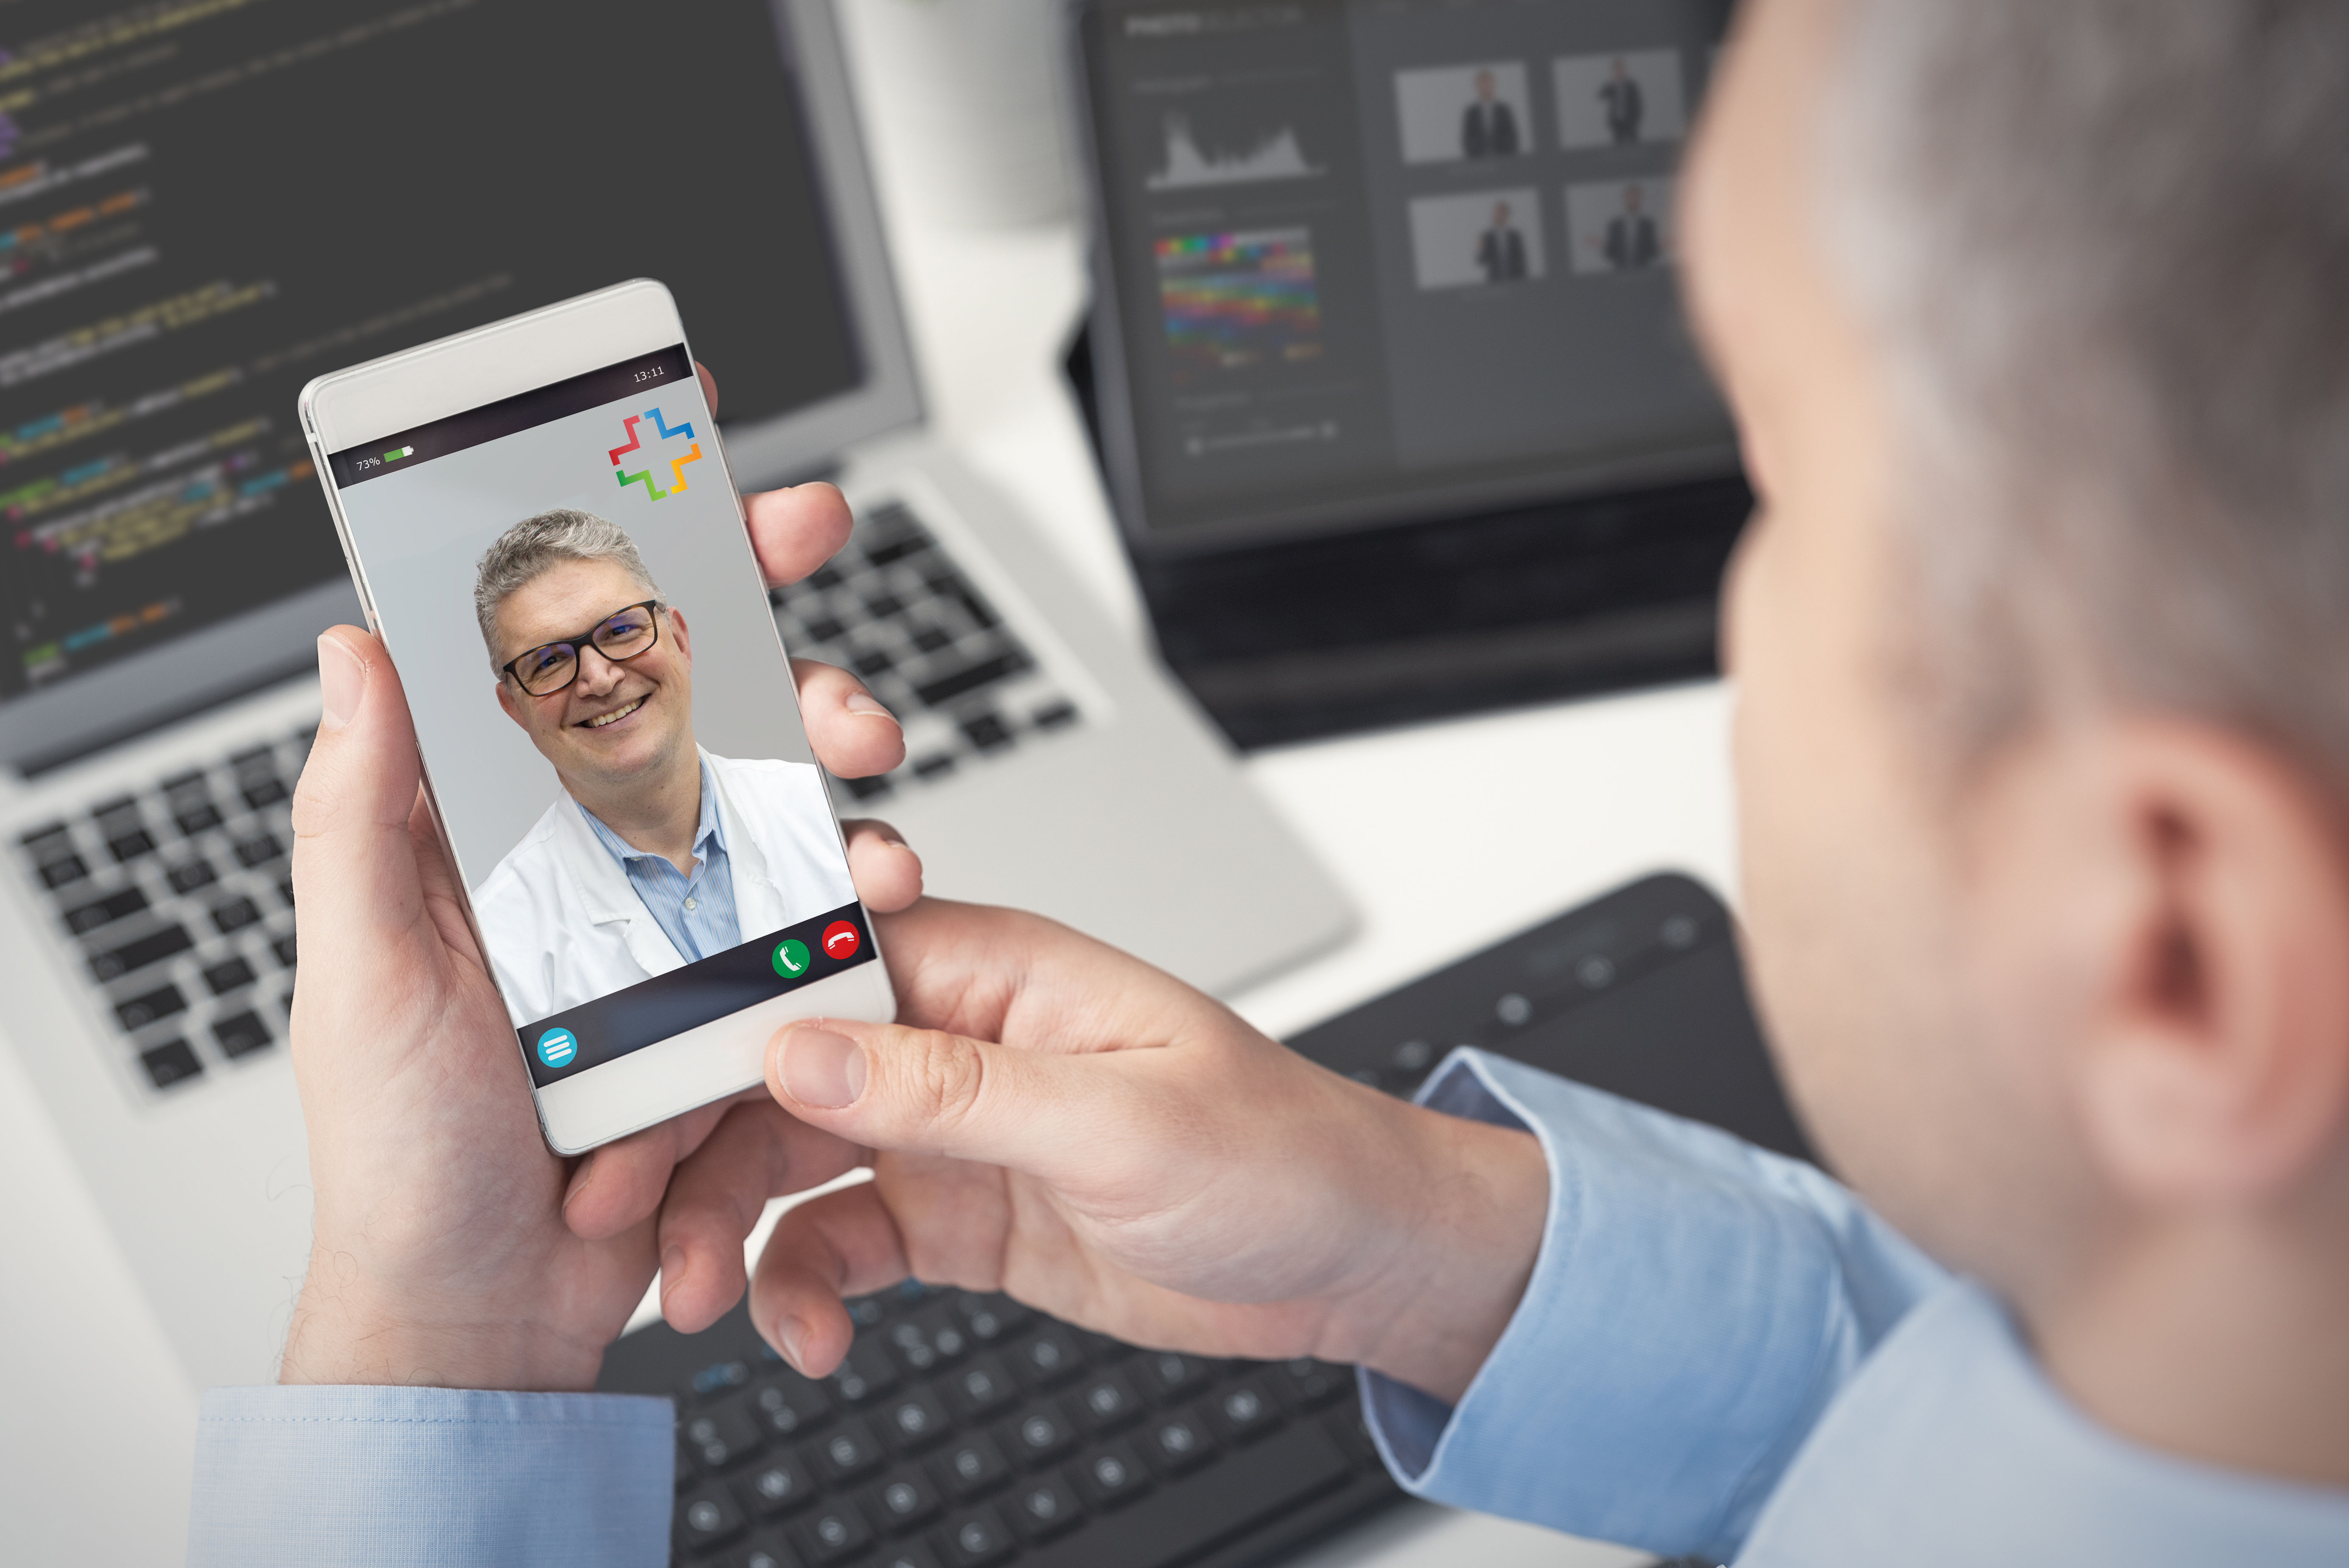 Dr. David Jakubowicz, Essen Health Care's director of Otolaryngology, is one of the many physicians that offer virtual visits to the patient population